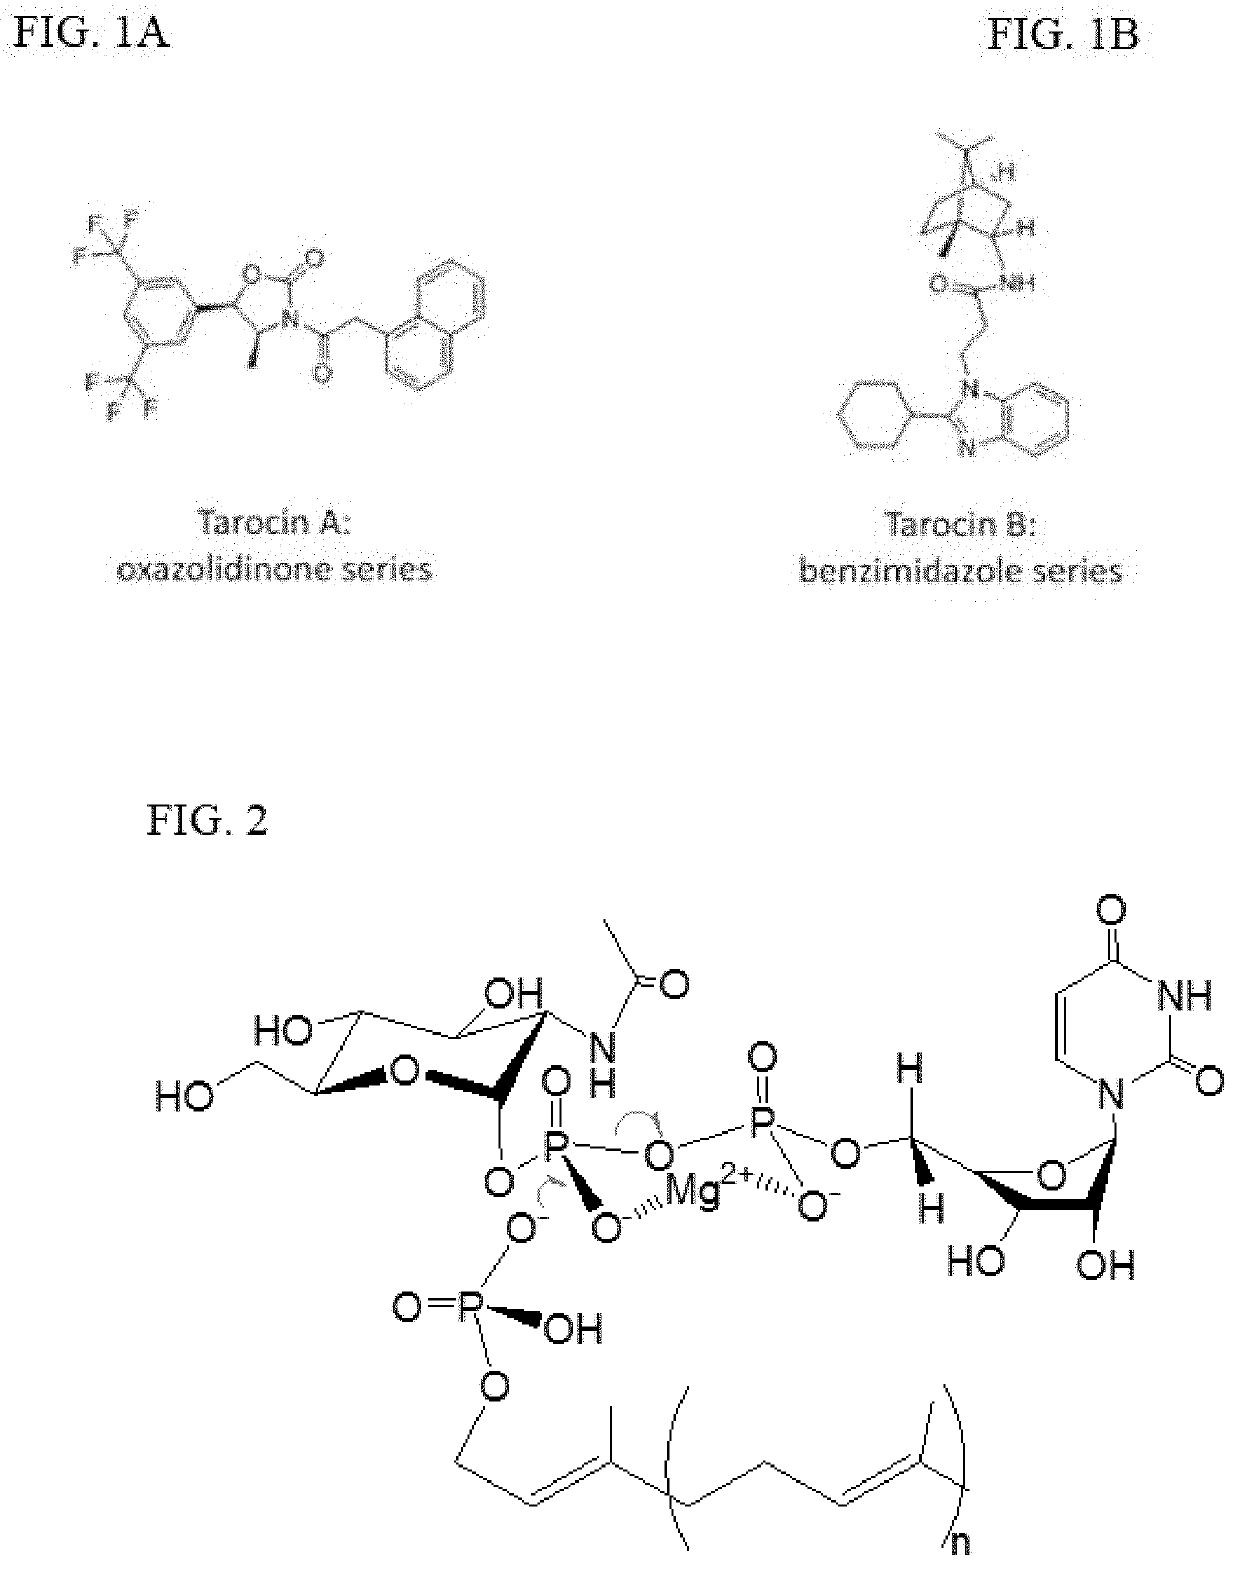 Tunicamycin related compounds with anti-bacterial activity